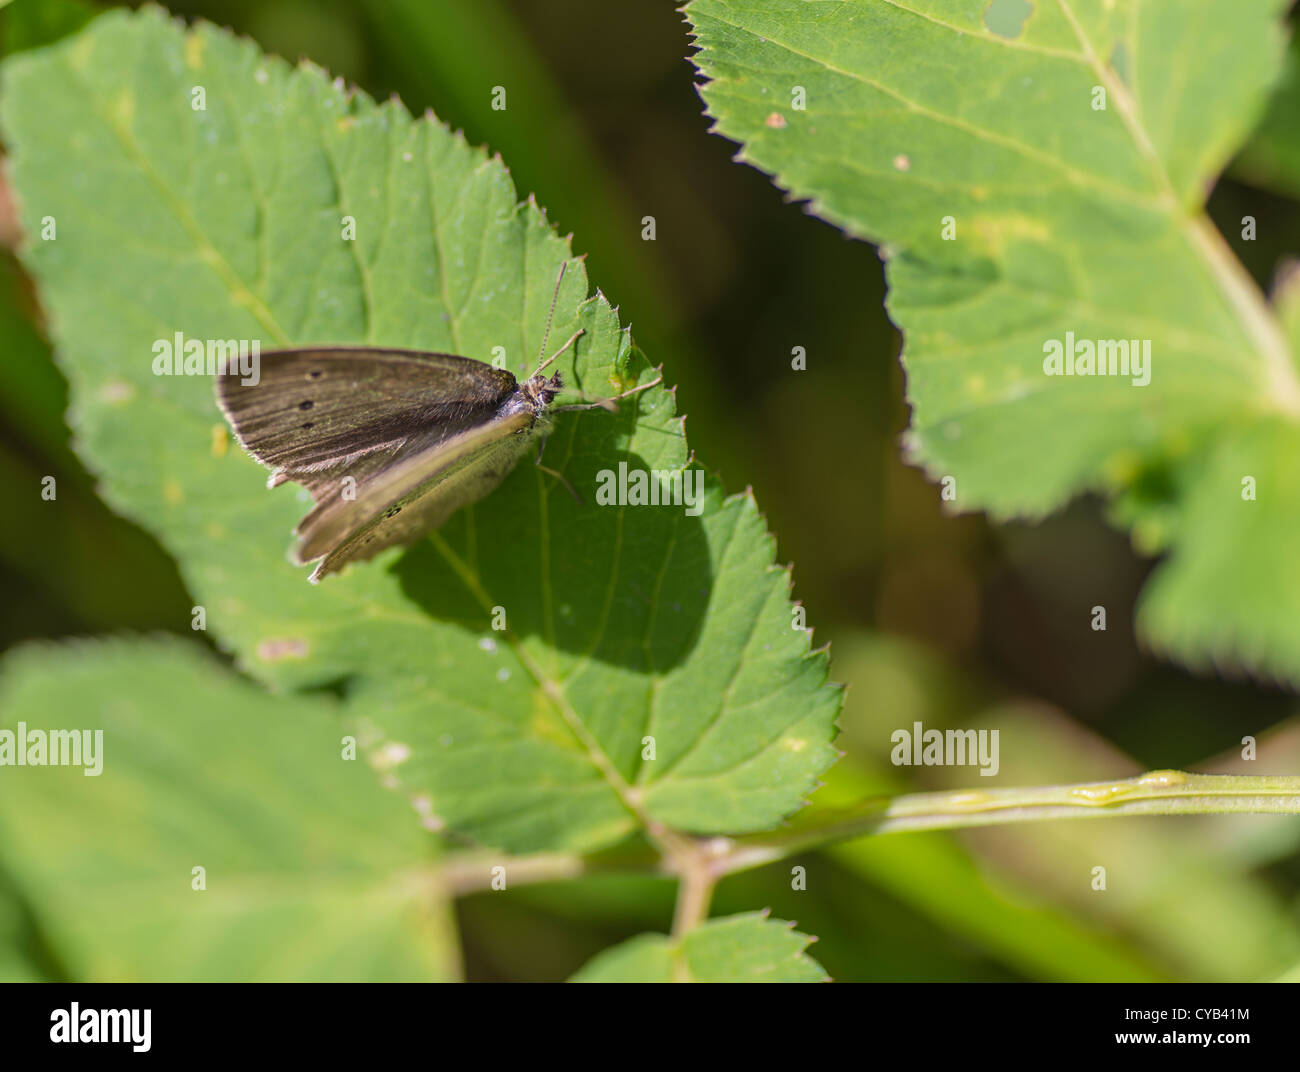 Ringlet butterfly resting on a leaf Stock Photo